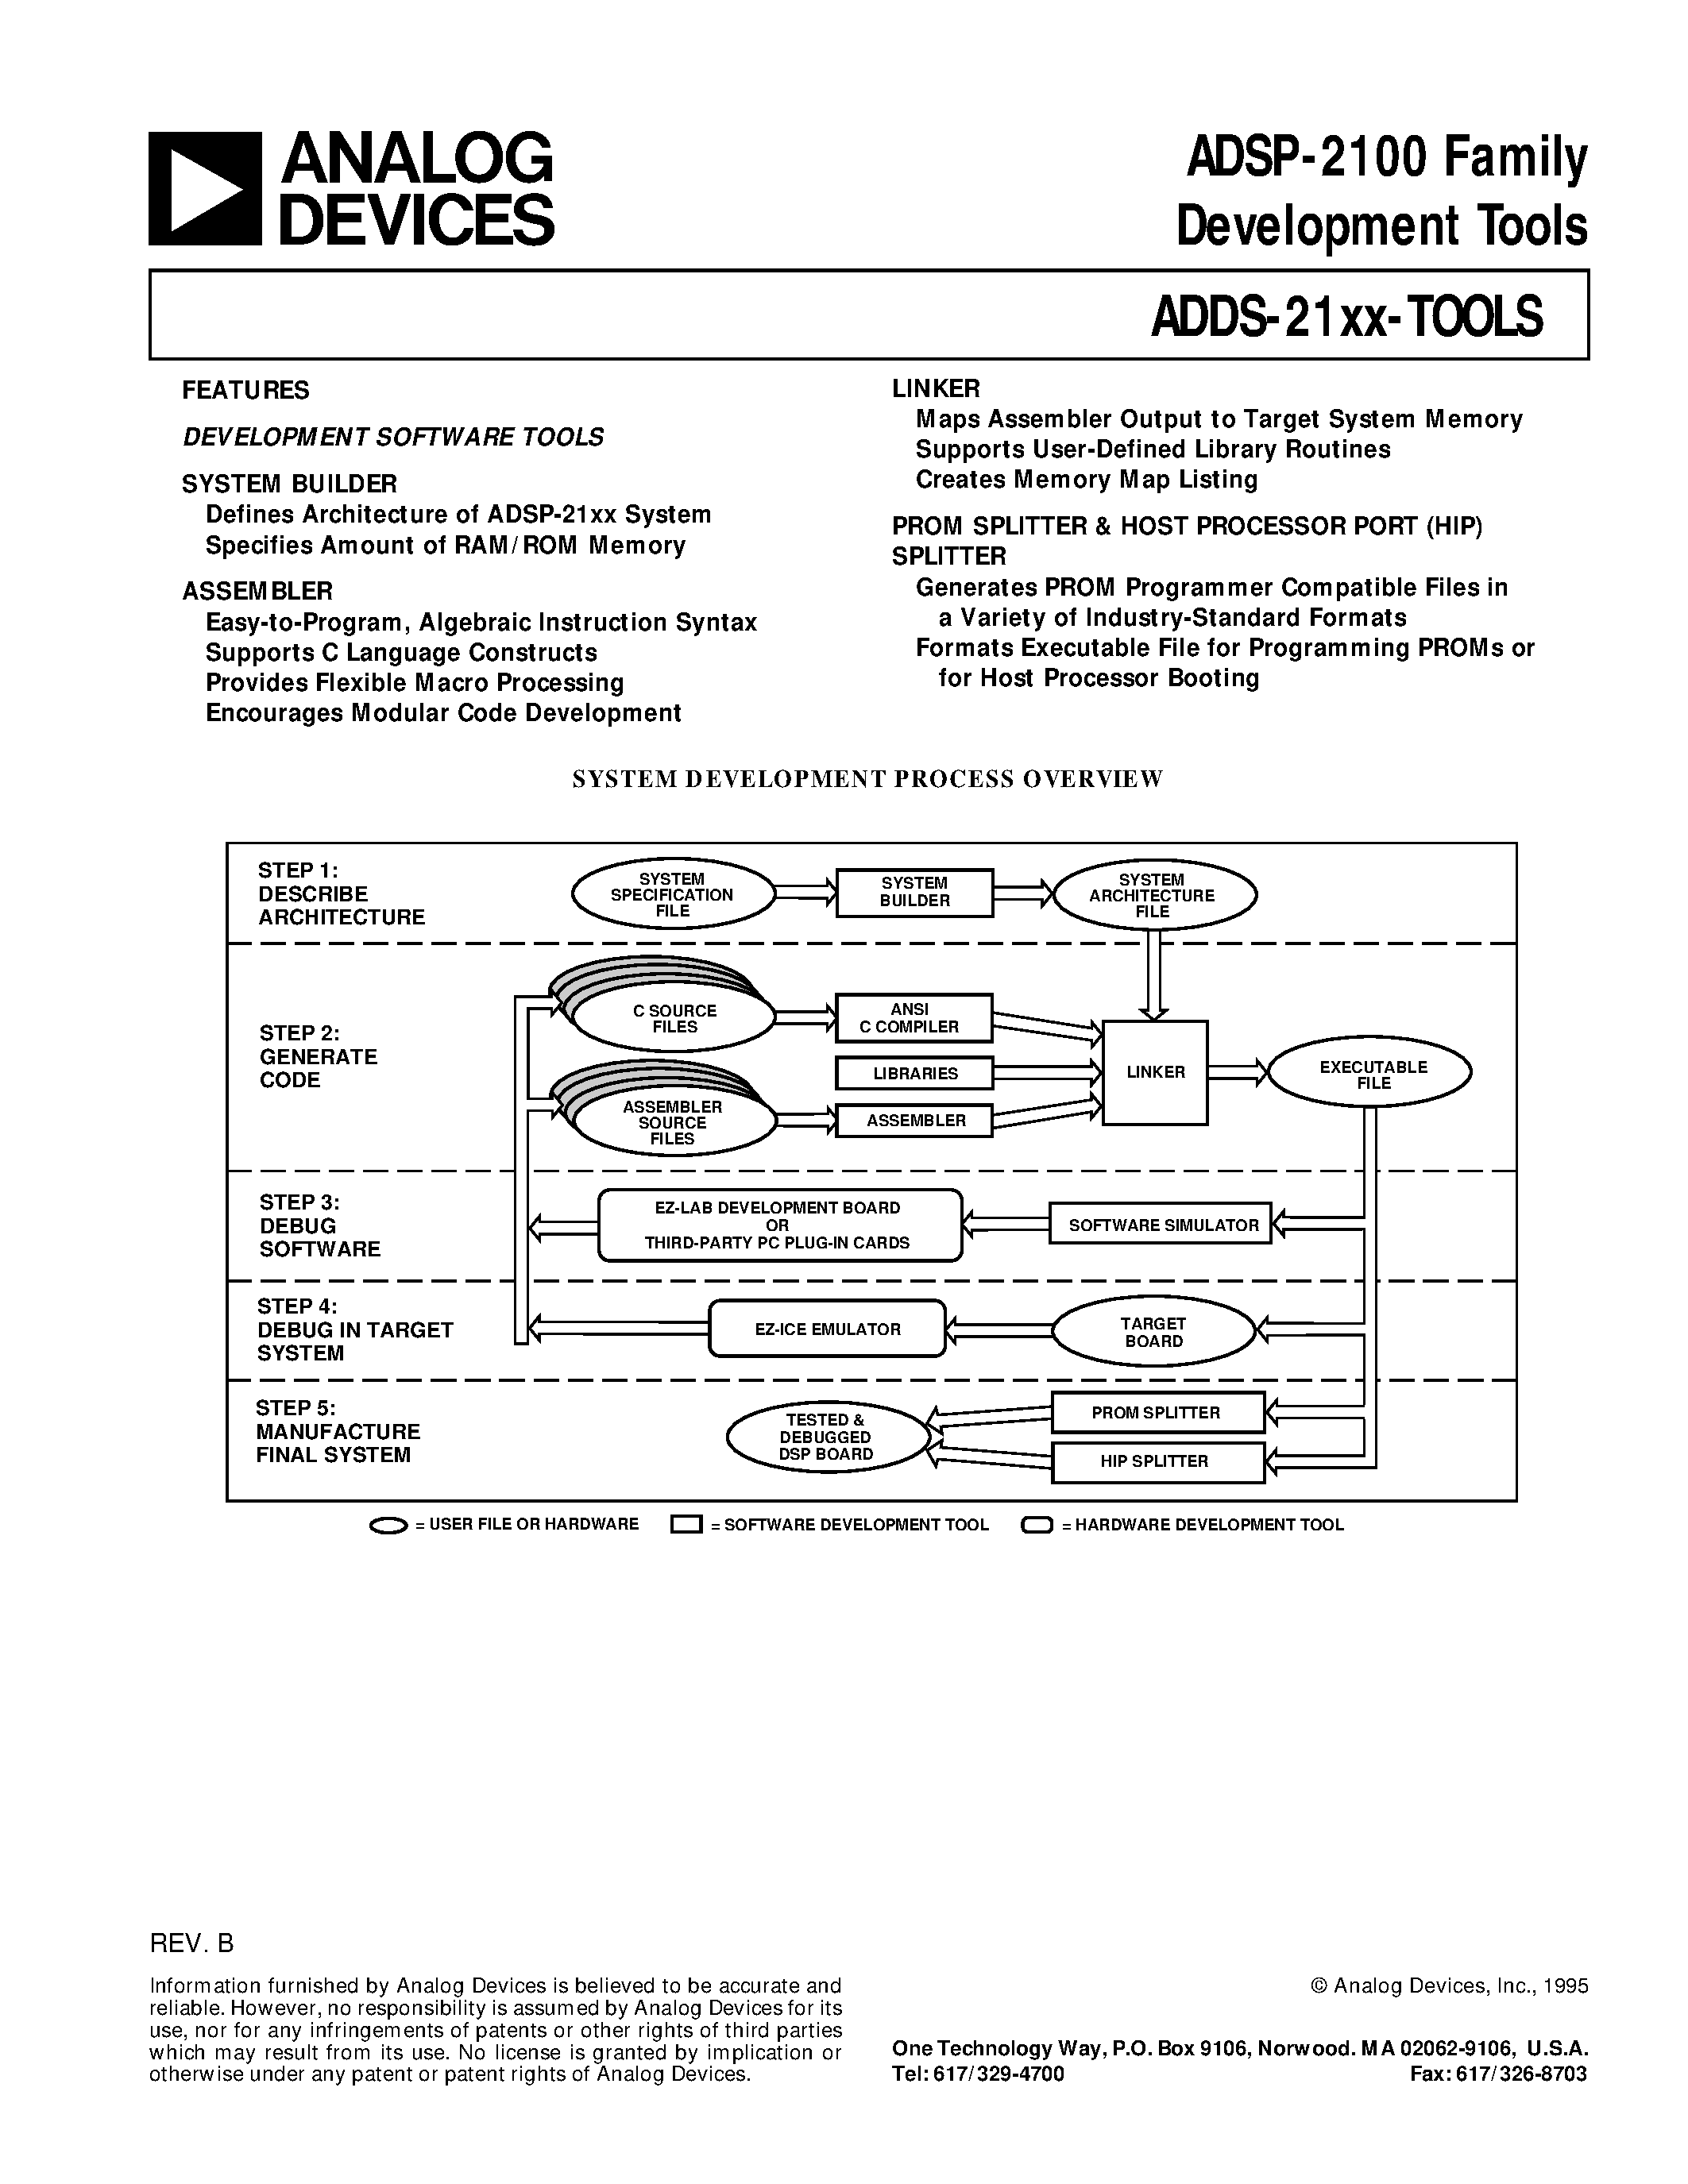 Datasheet ADDS-2101-3V - ADSP-2100 Family Development Tools page 1